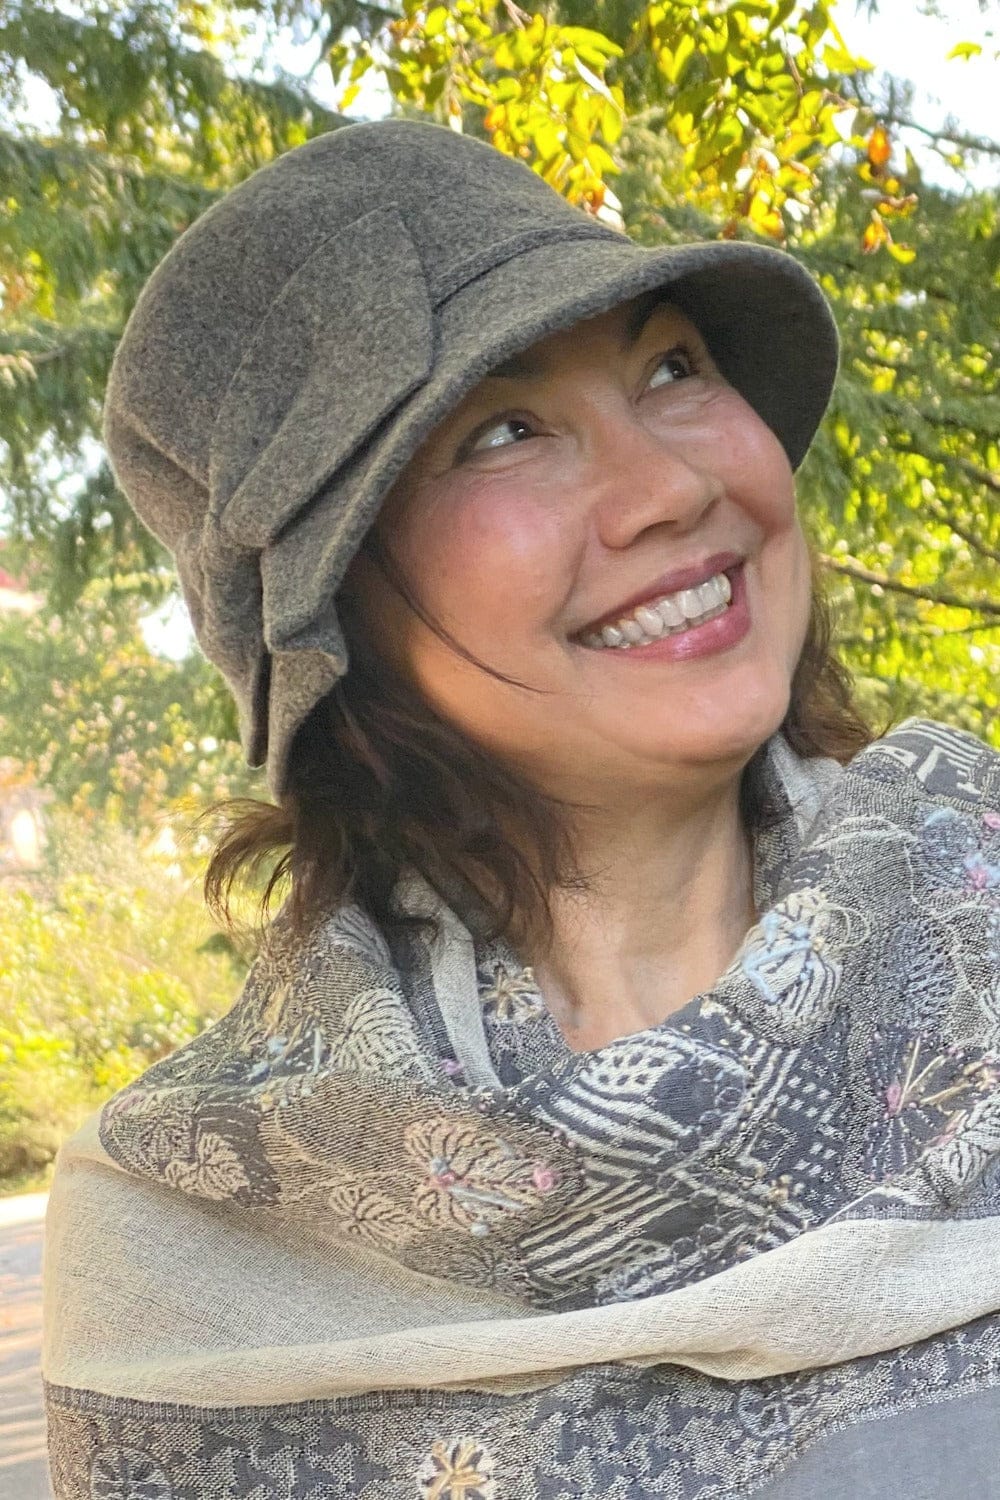 Wool hat with side bow worn on a smiling woman styled with a grey designed scarf.